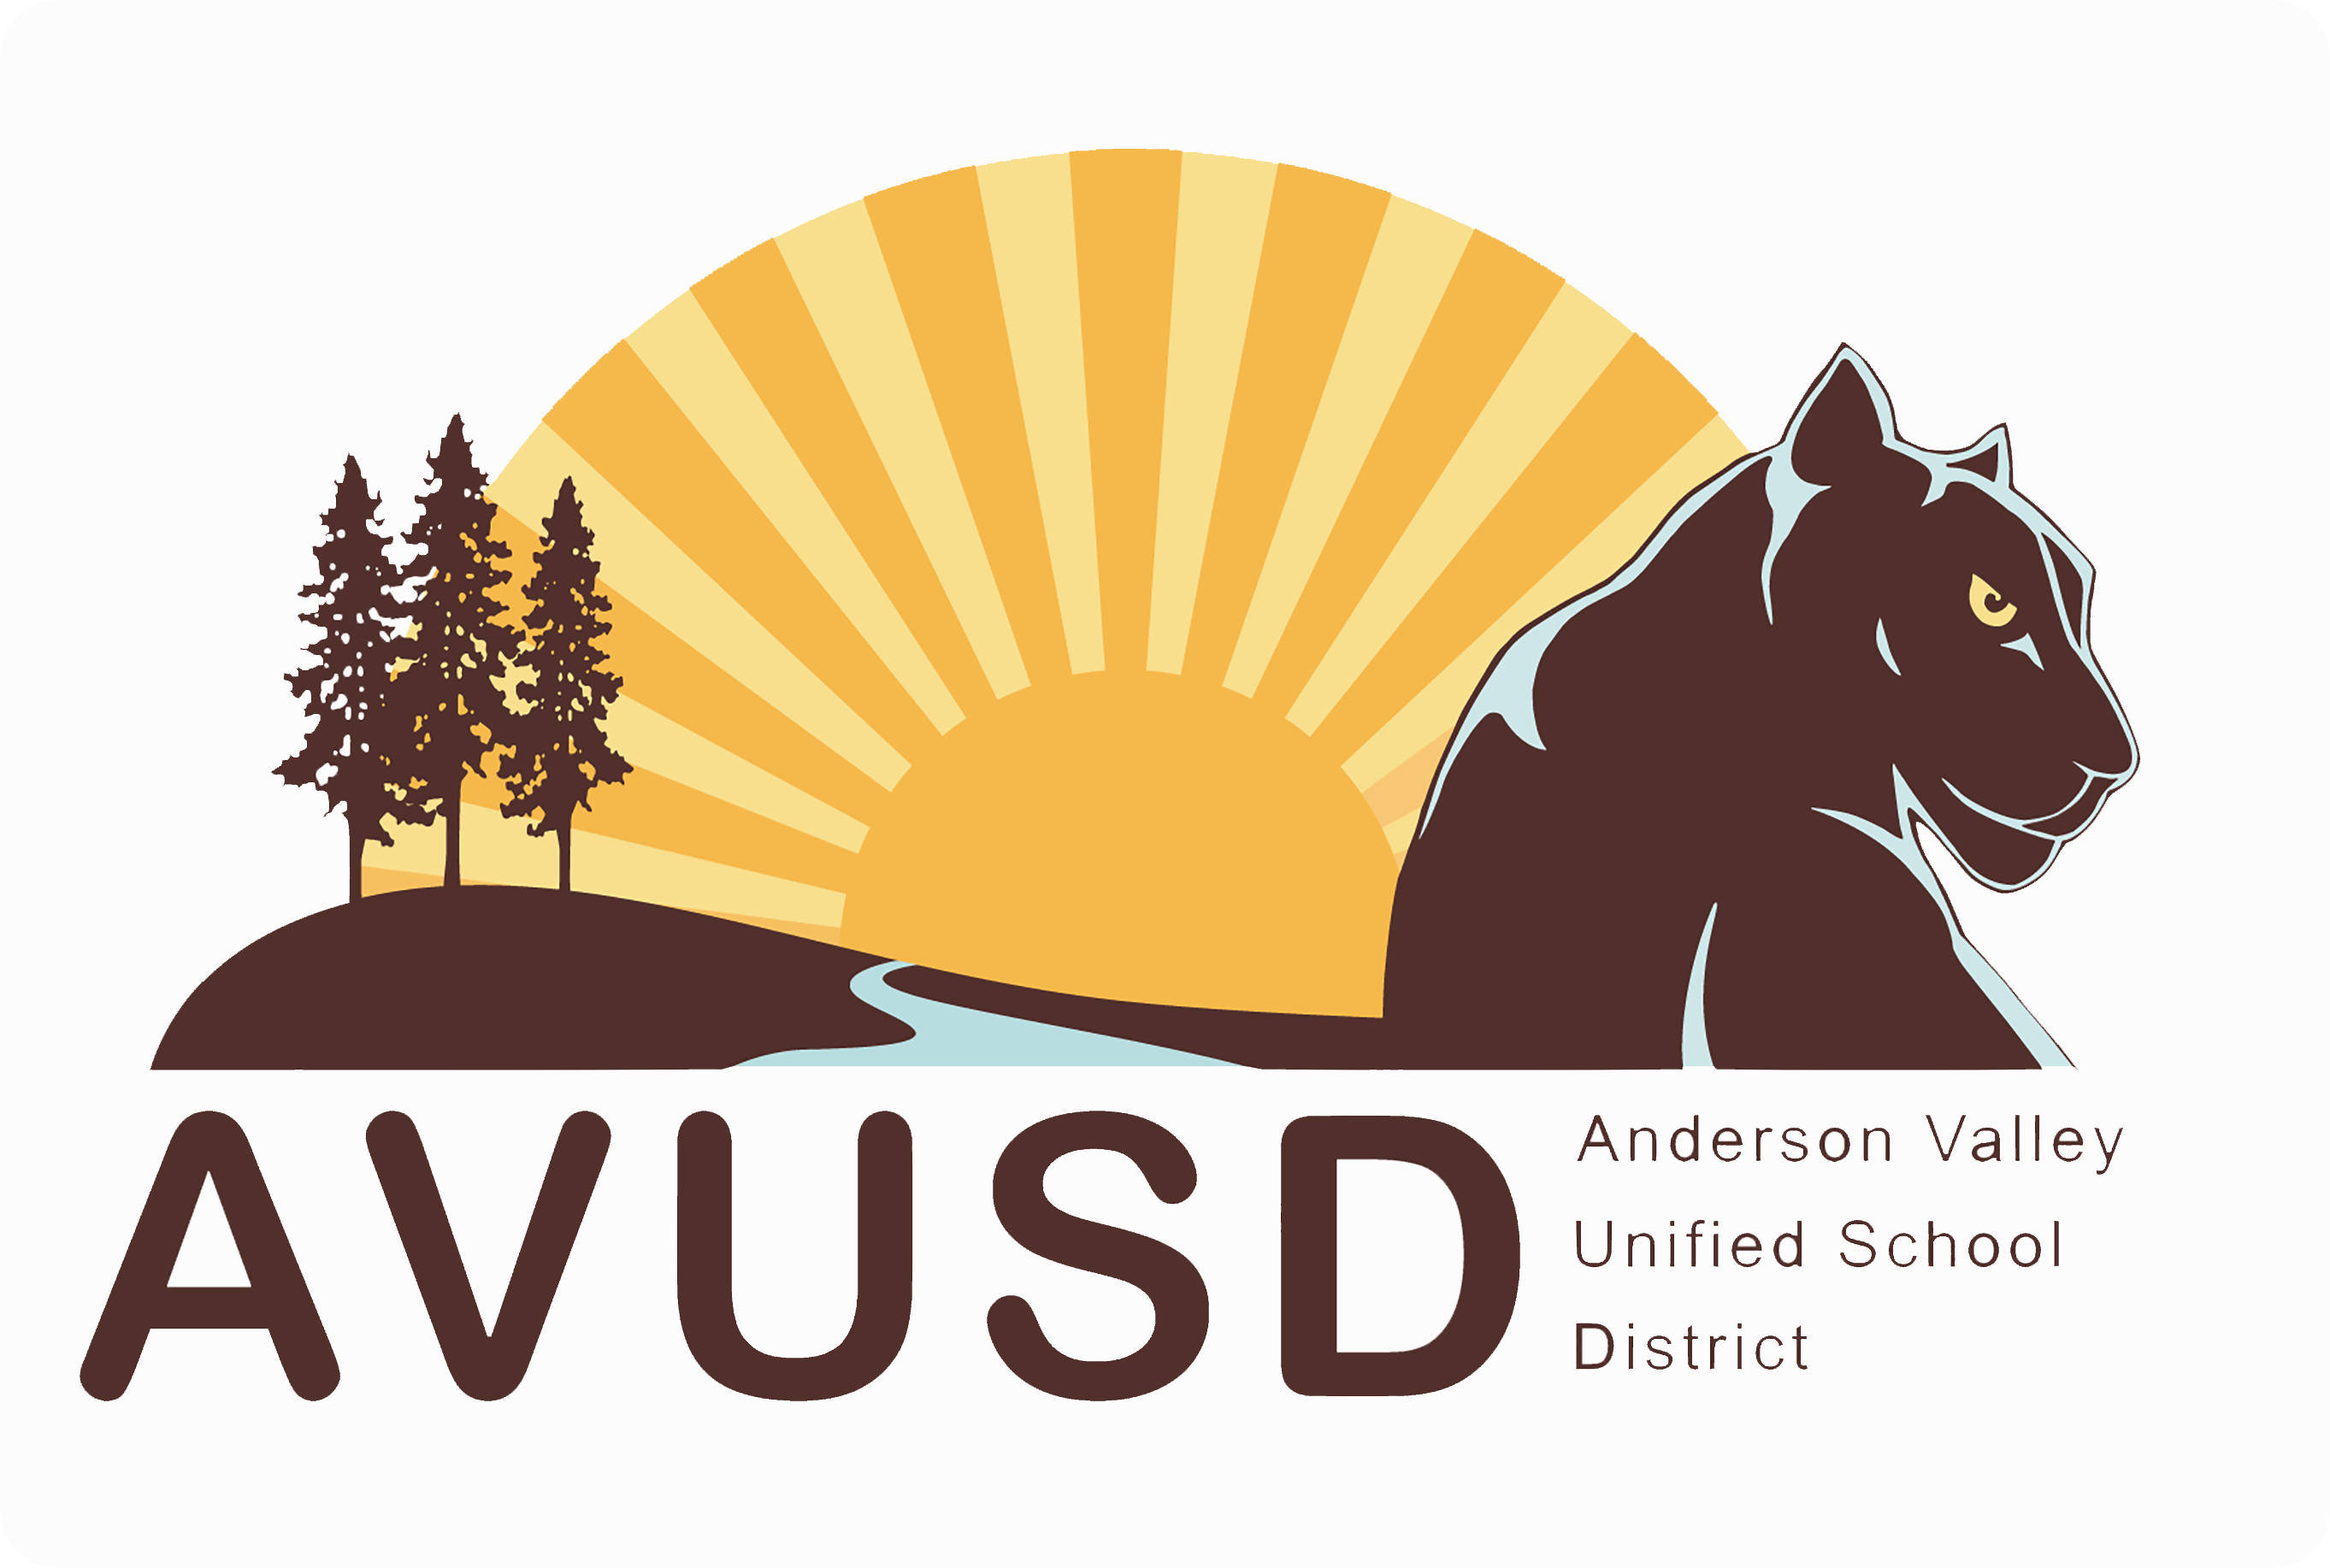 Anderson Valley Unified